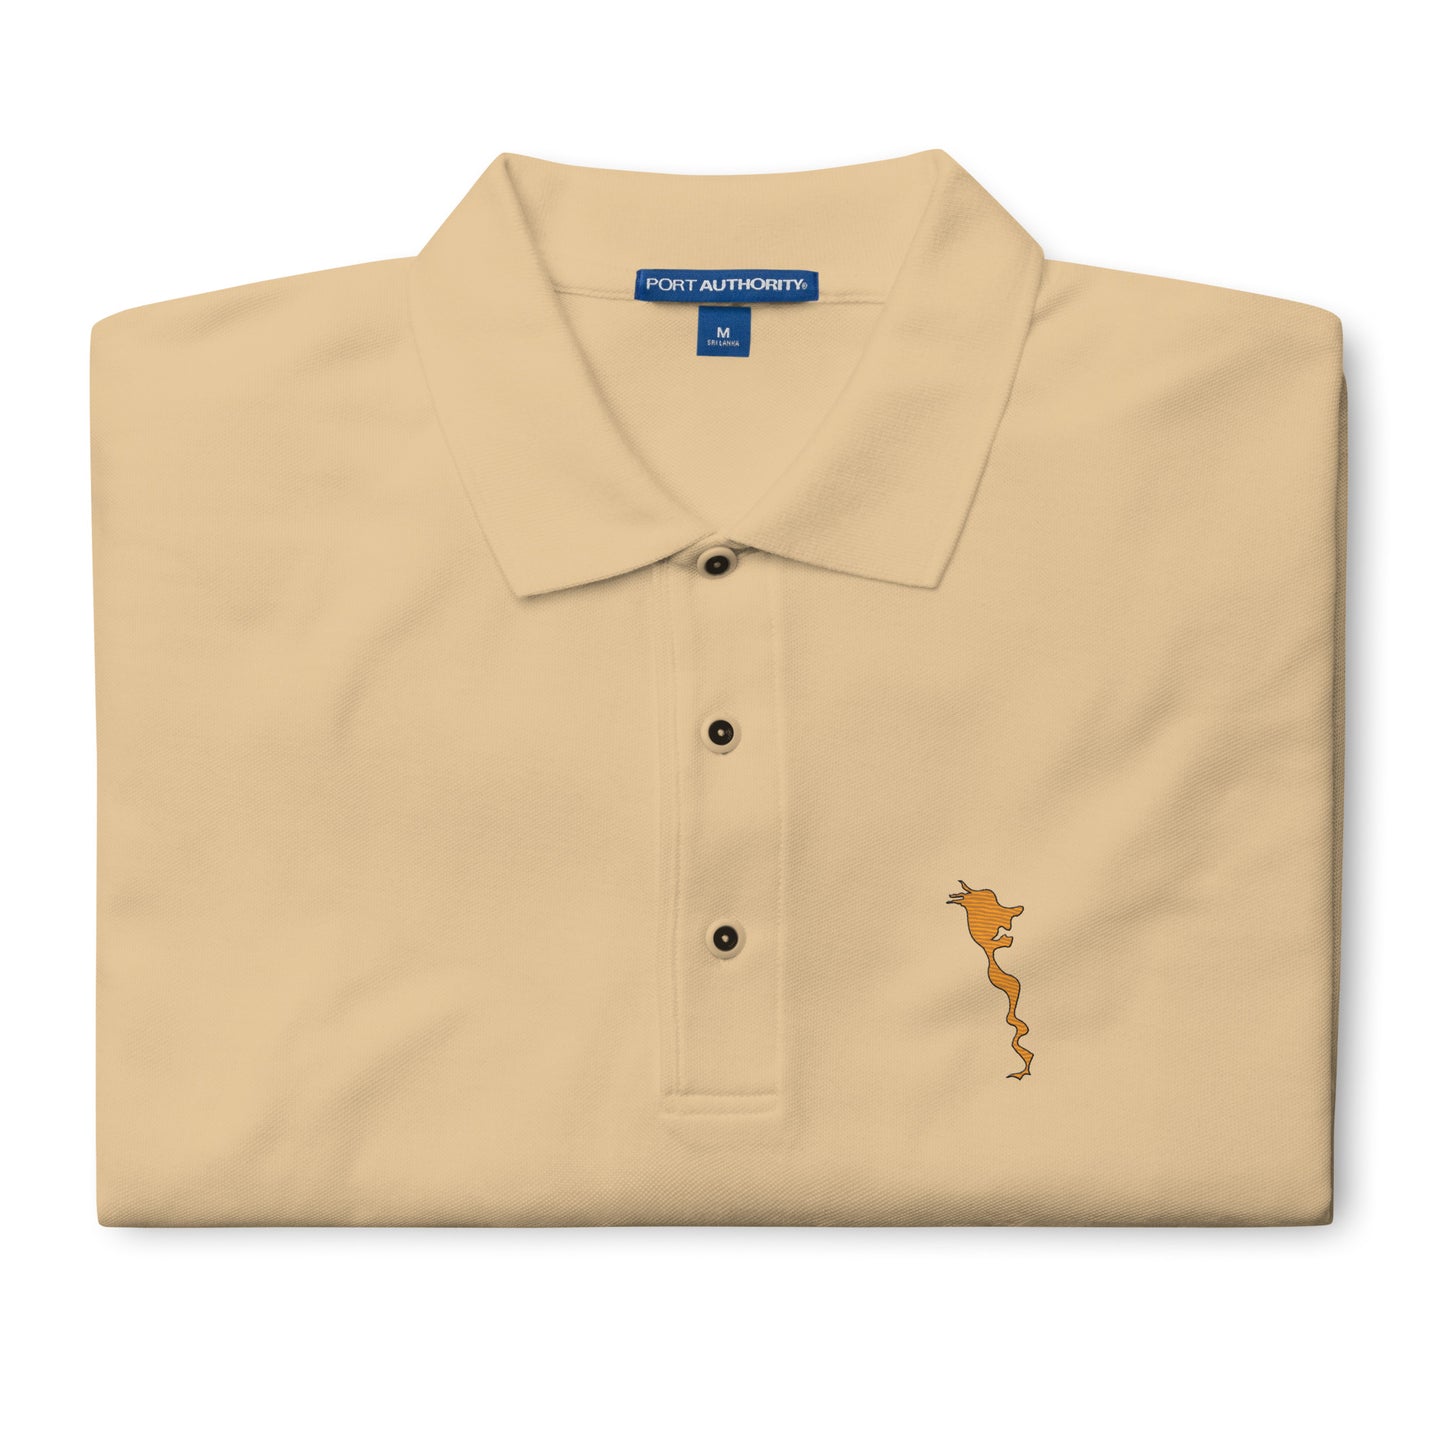 Men's Embroidered Premium Polo "Early"